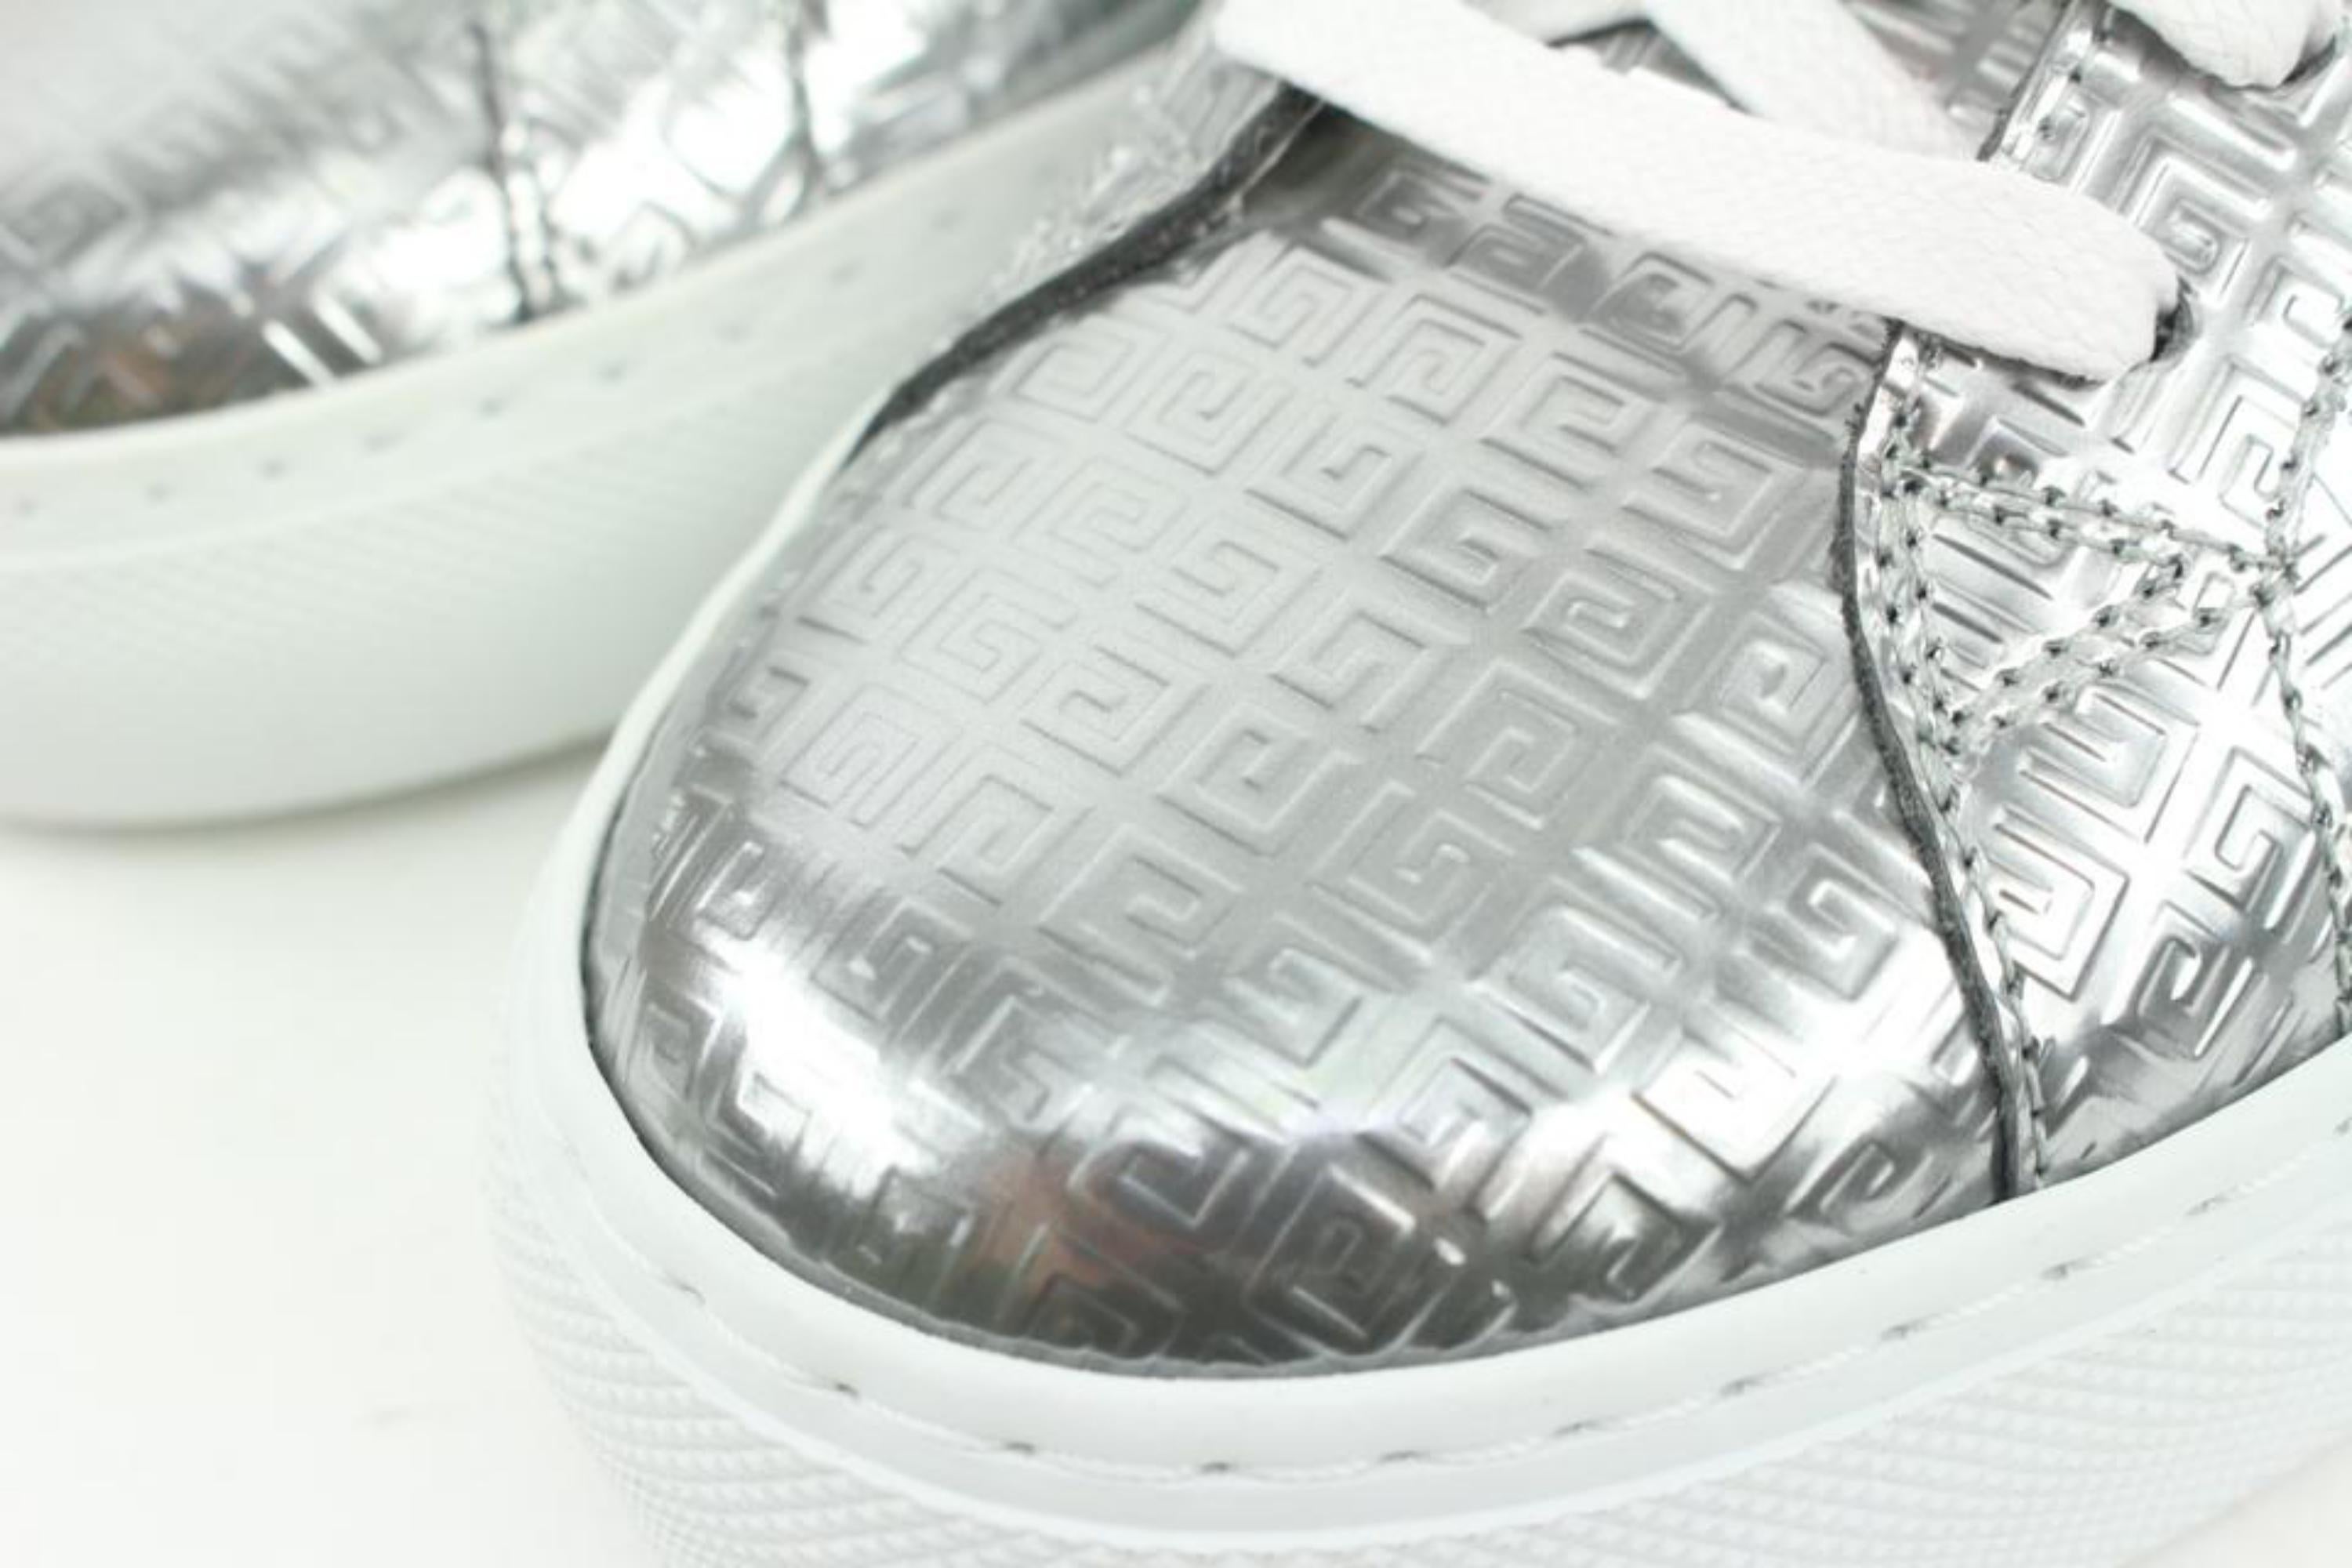 Givenchy Size 37 Women's Logo Silver Urban Street Sneaker 114gi4
Date Code/Serial Number: DN 0271
Made In: Portugal
Measurements: Length:  10.2